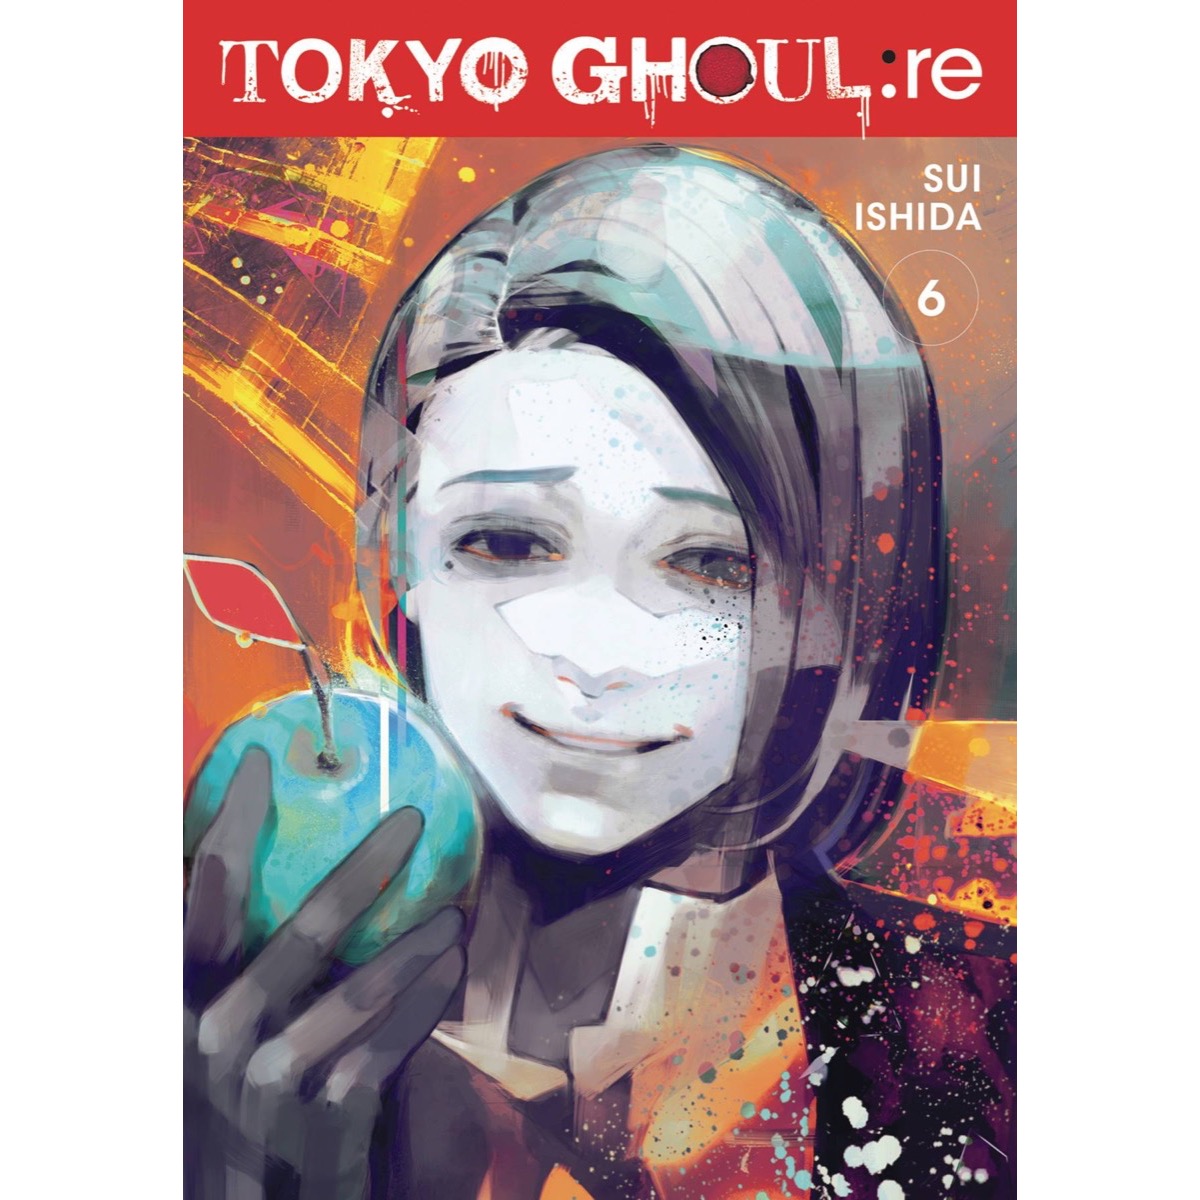 Tokyo Ghoul Re: Vol 6 | Anime and Things